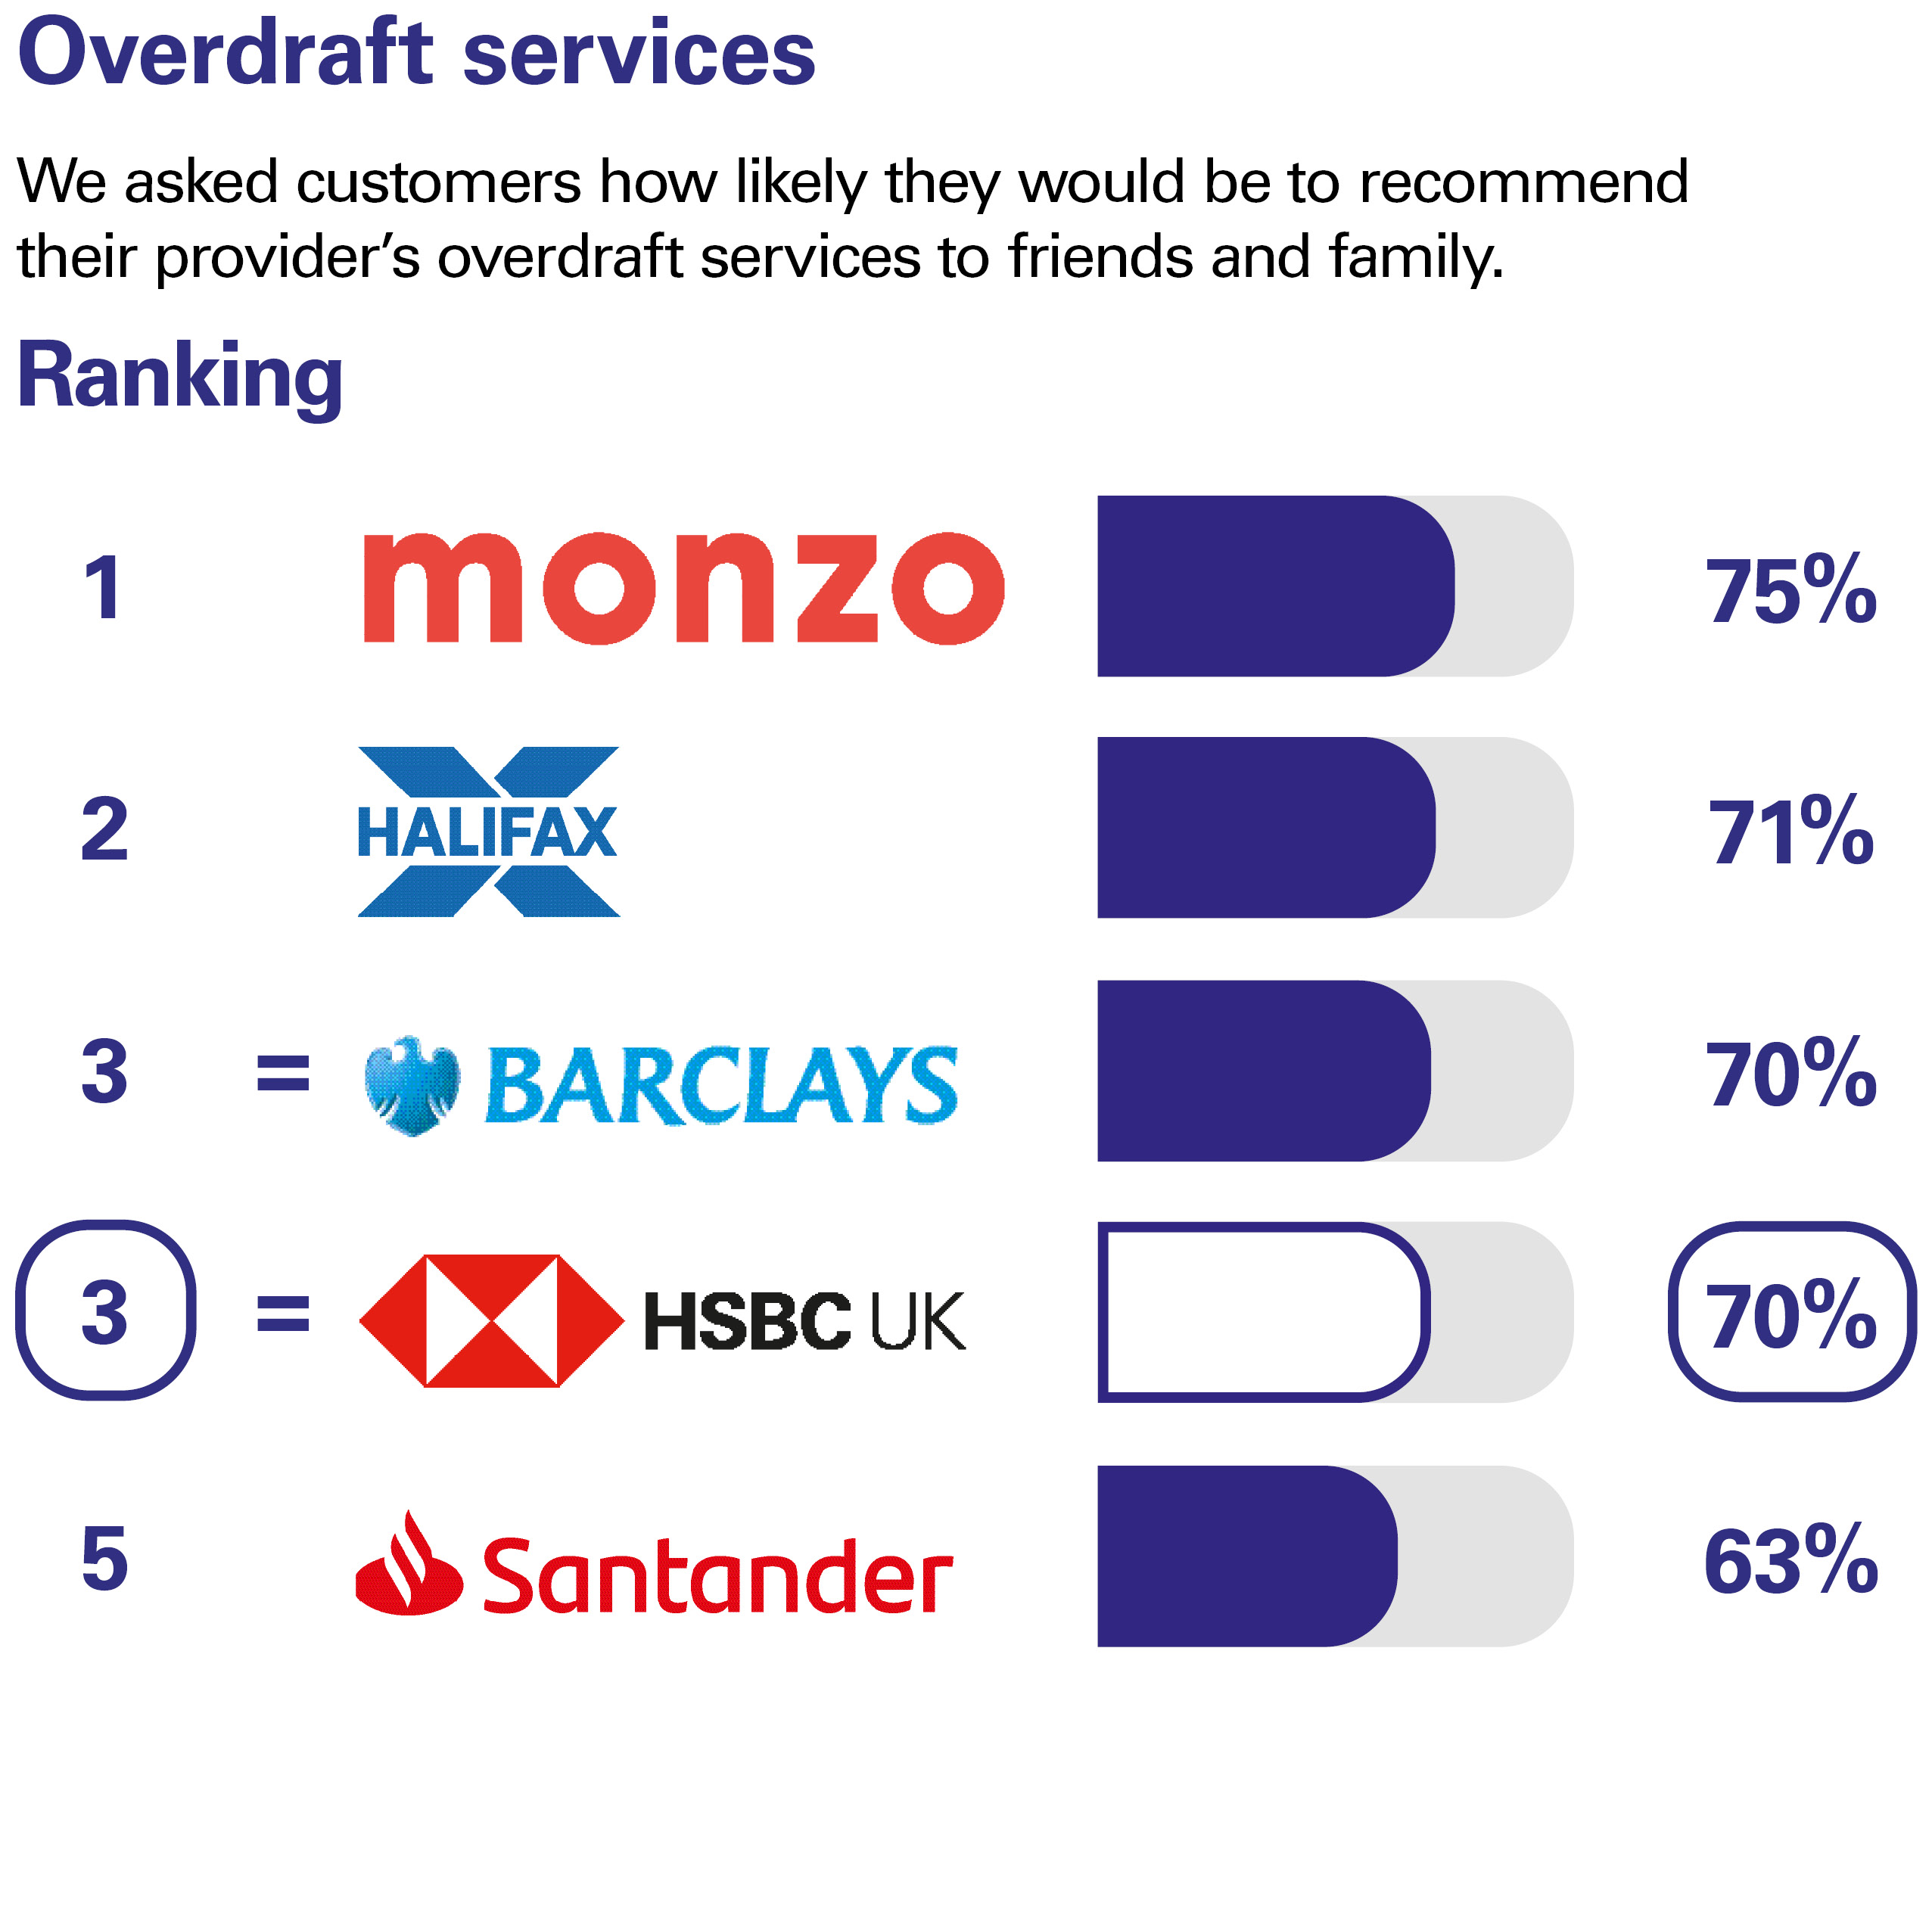 Overdraft services. We asked customers how likely they would be to recommend their provider’s overdraft services to friends and family. Ranking: 1 Monzo 75% 2 Halifax 71% equal 3 Barclays 70% equal 3 HSBC UK 70% 5 Santander 63%